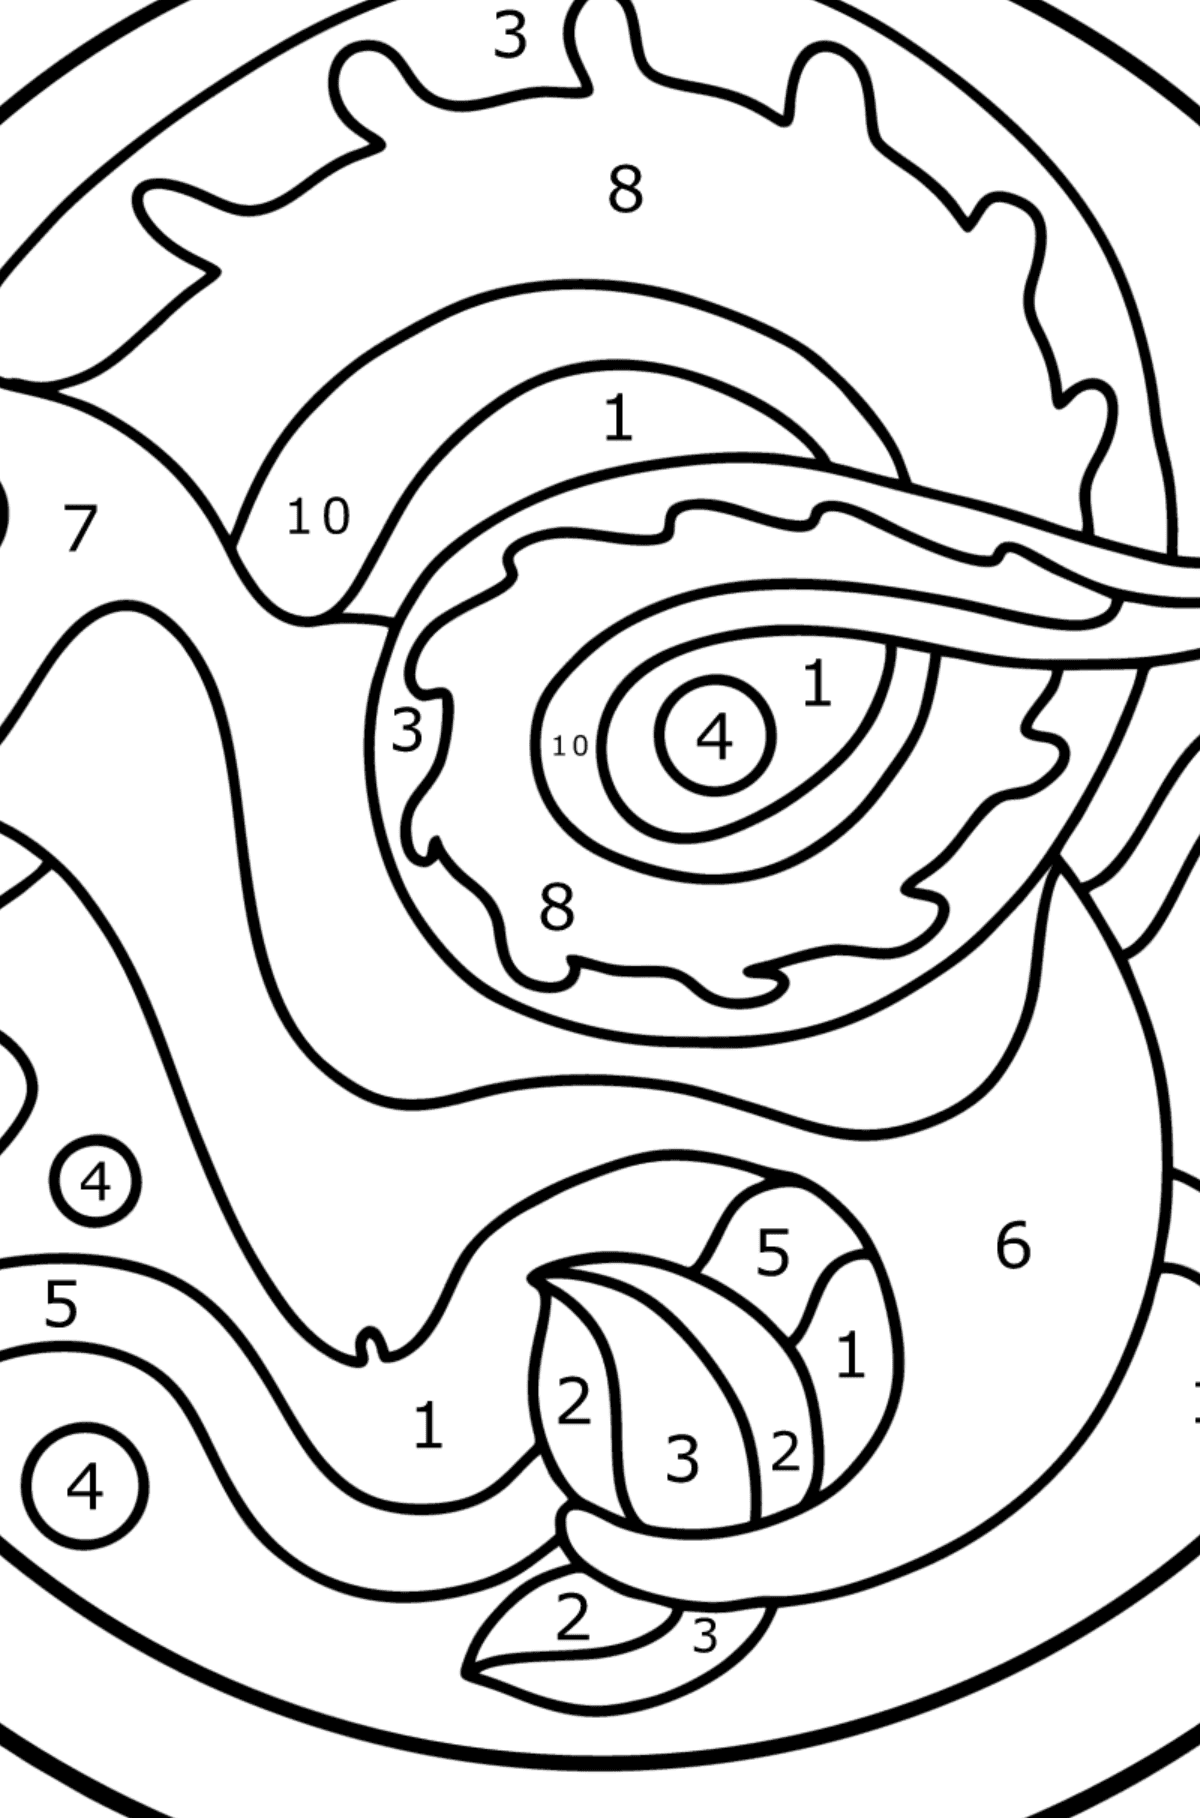 Coloring page for kids - Capricorn zodiac sign - Coloring by Numbers for Kids